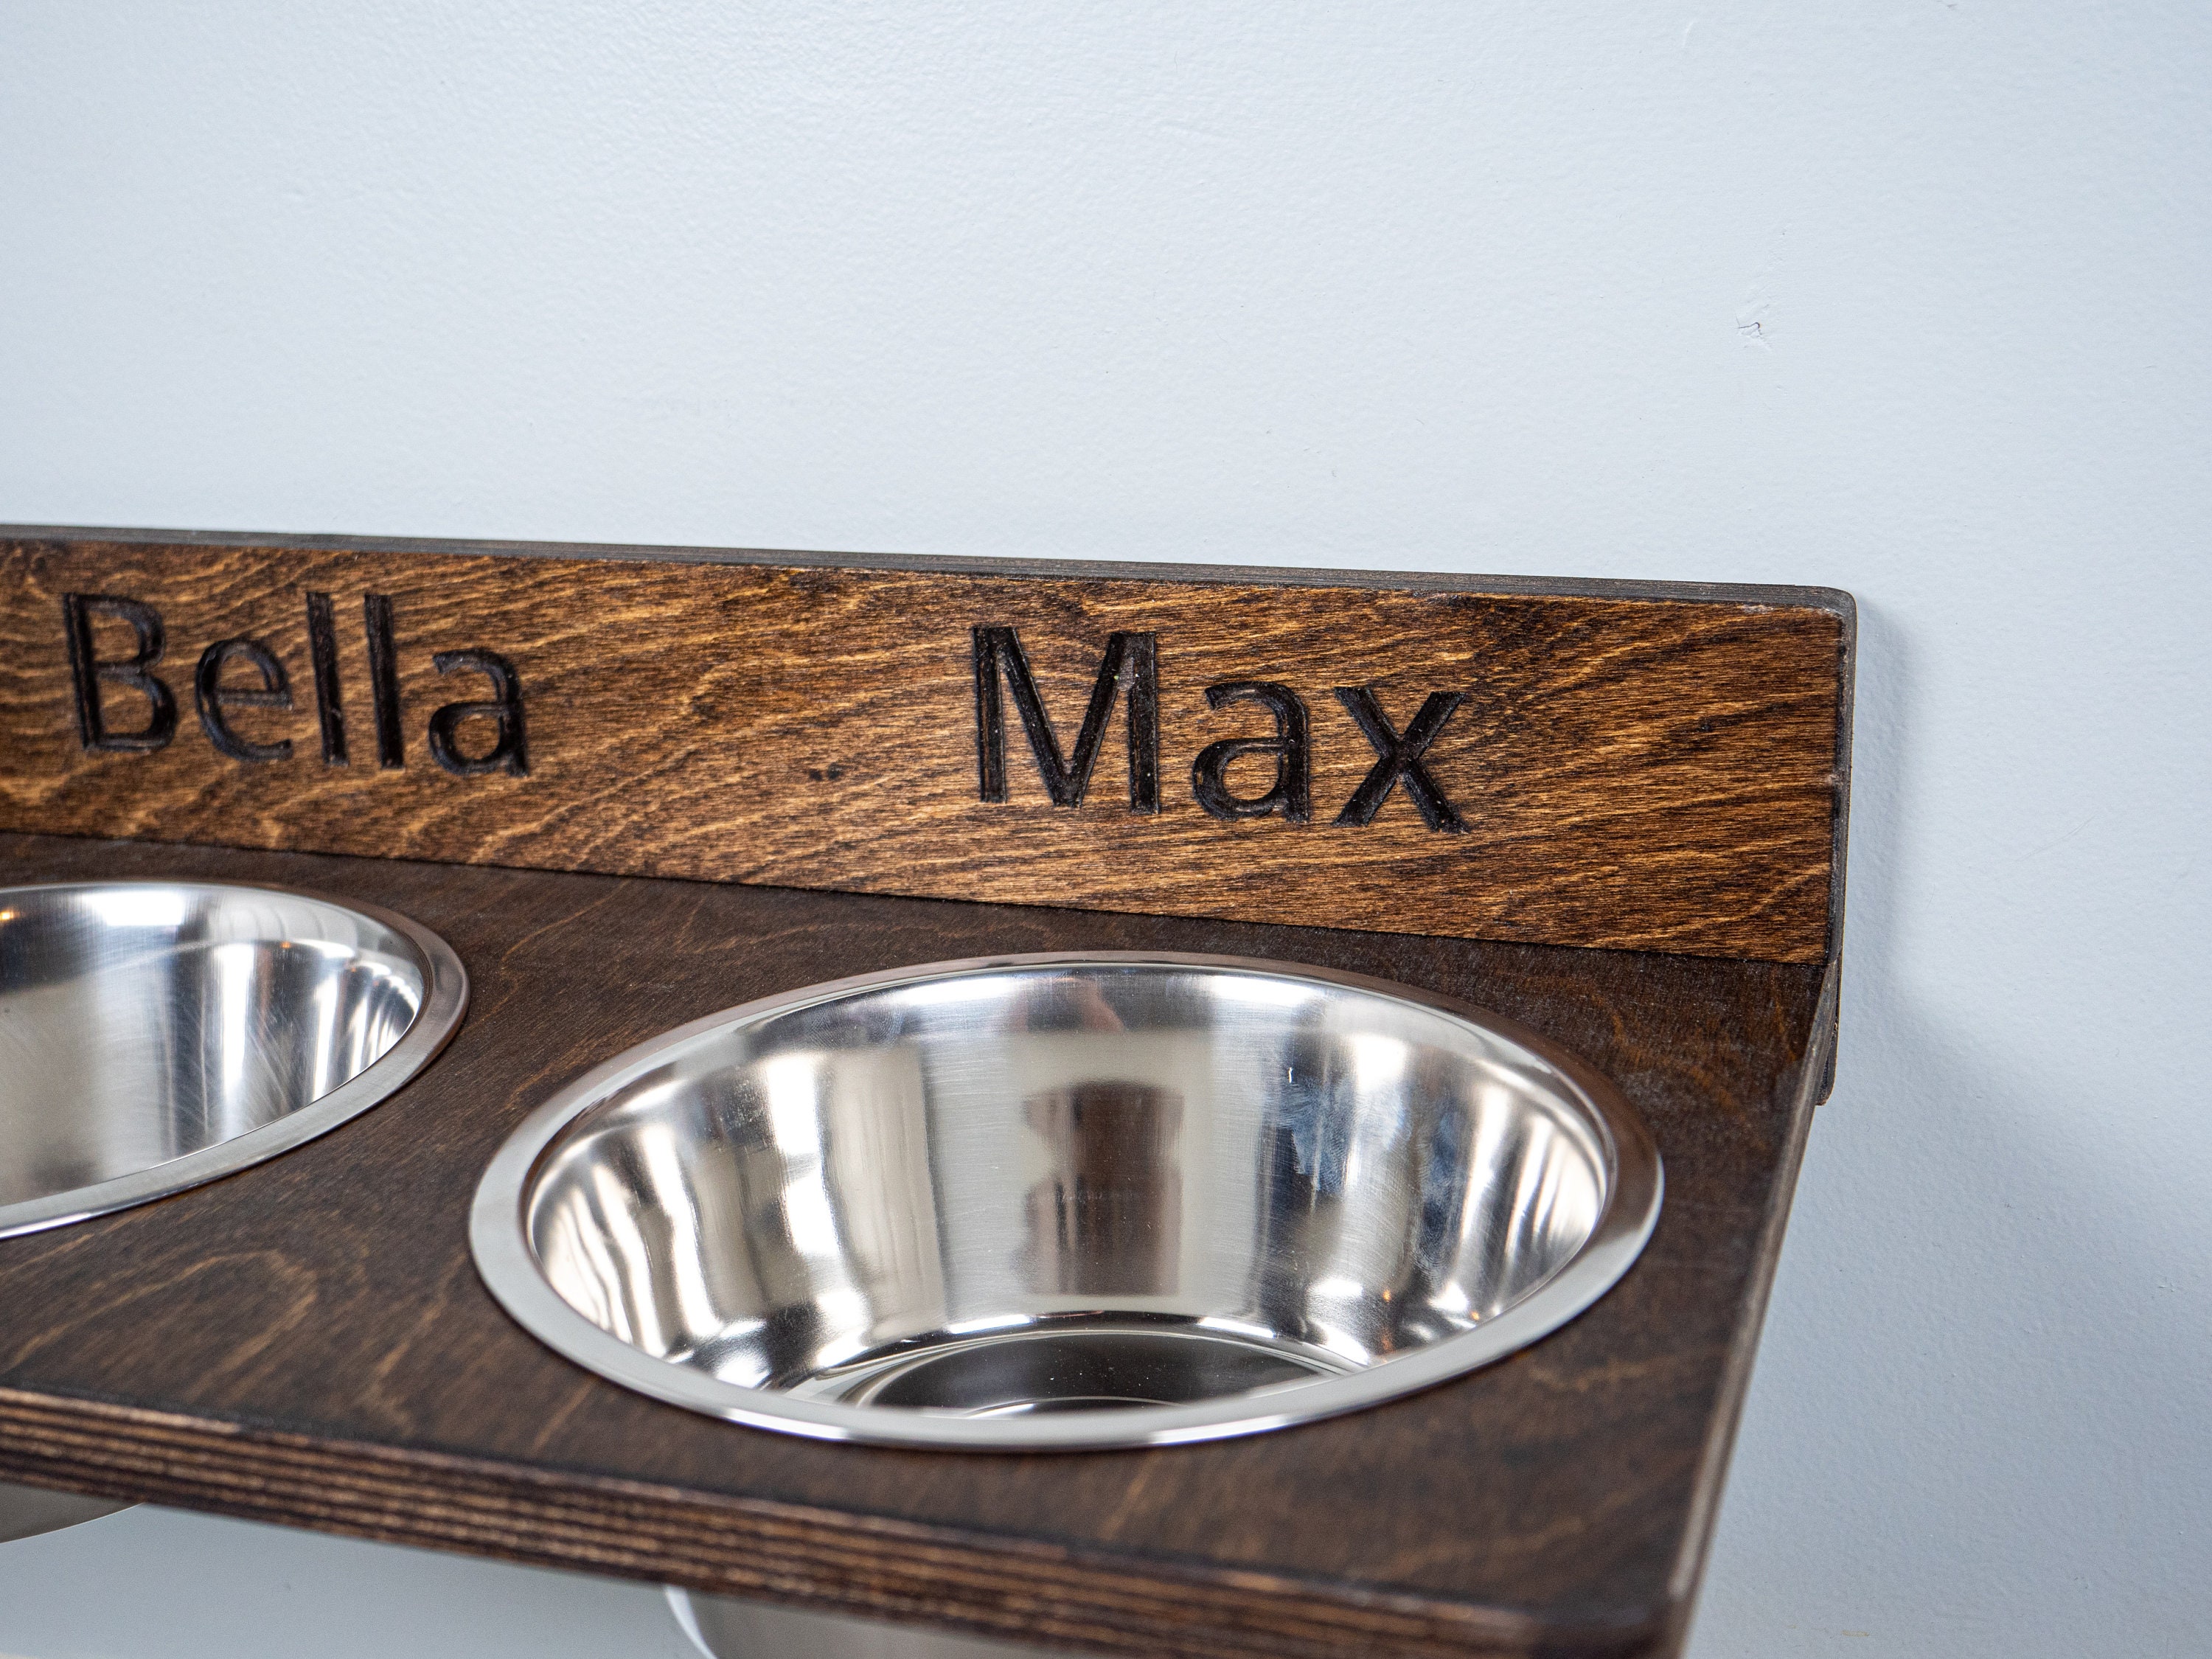 Wall Mounted Dog Bowl Stand - Bowls included